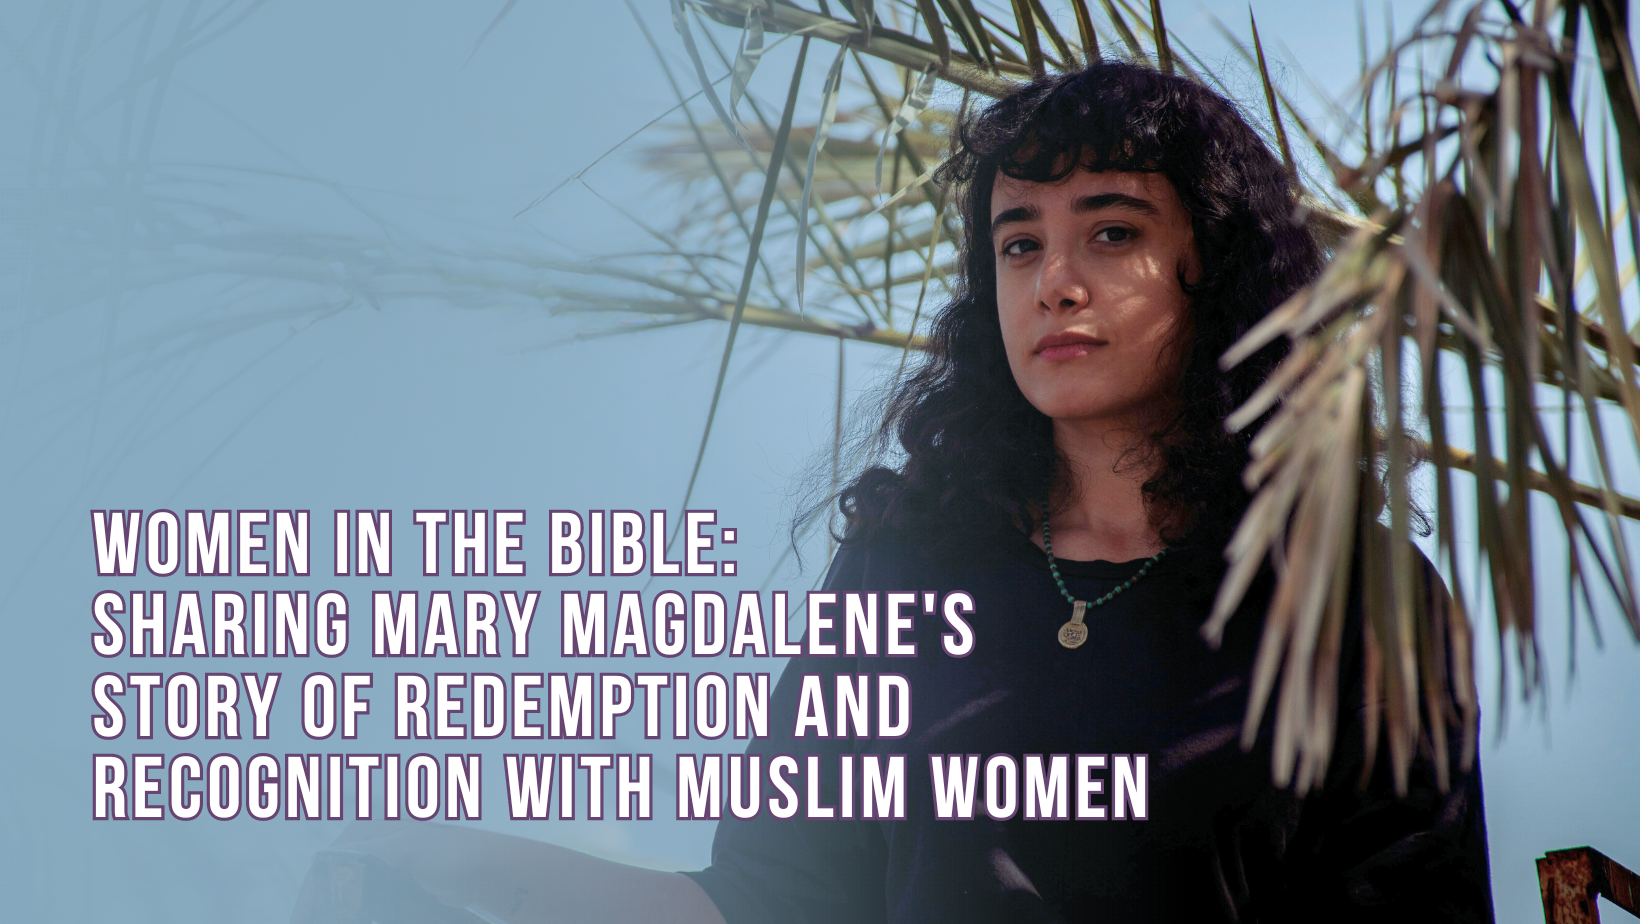 Sharing Mary Magdalene with Muslim women